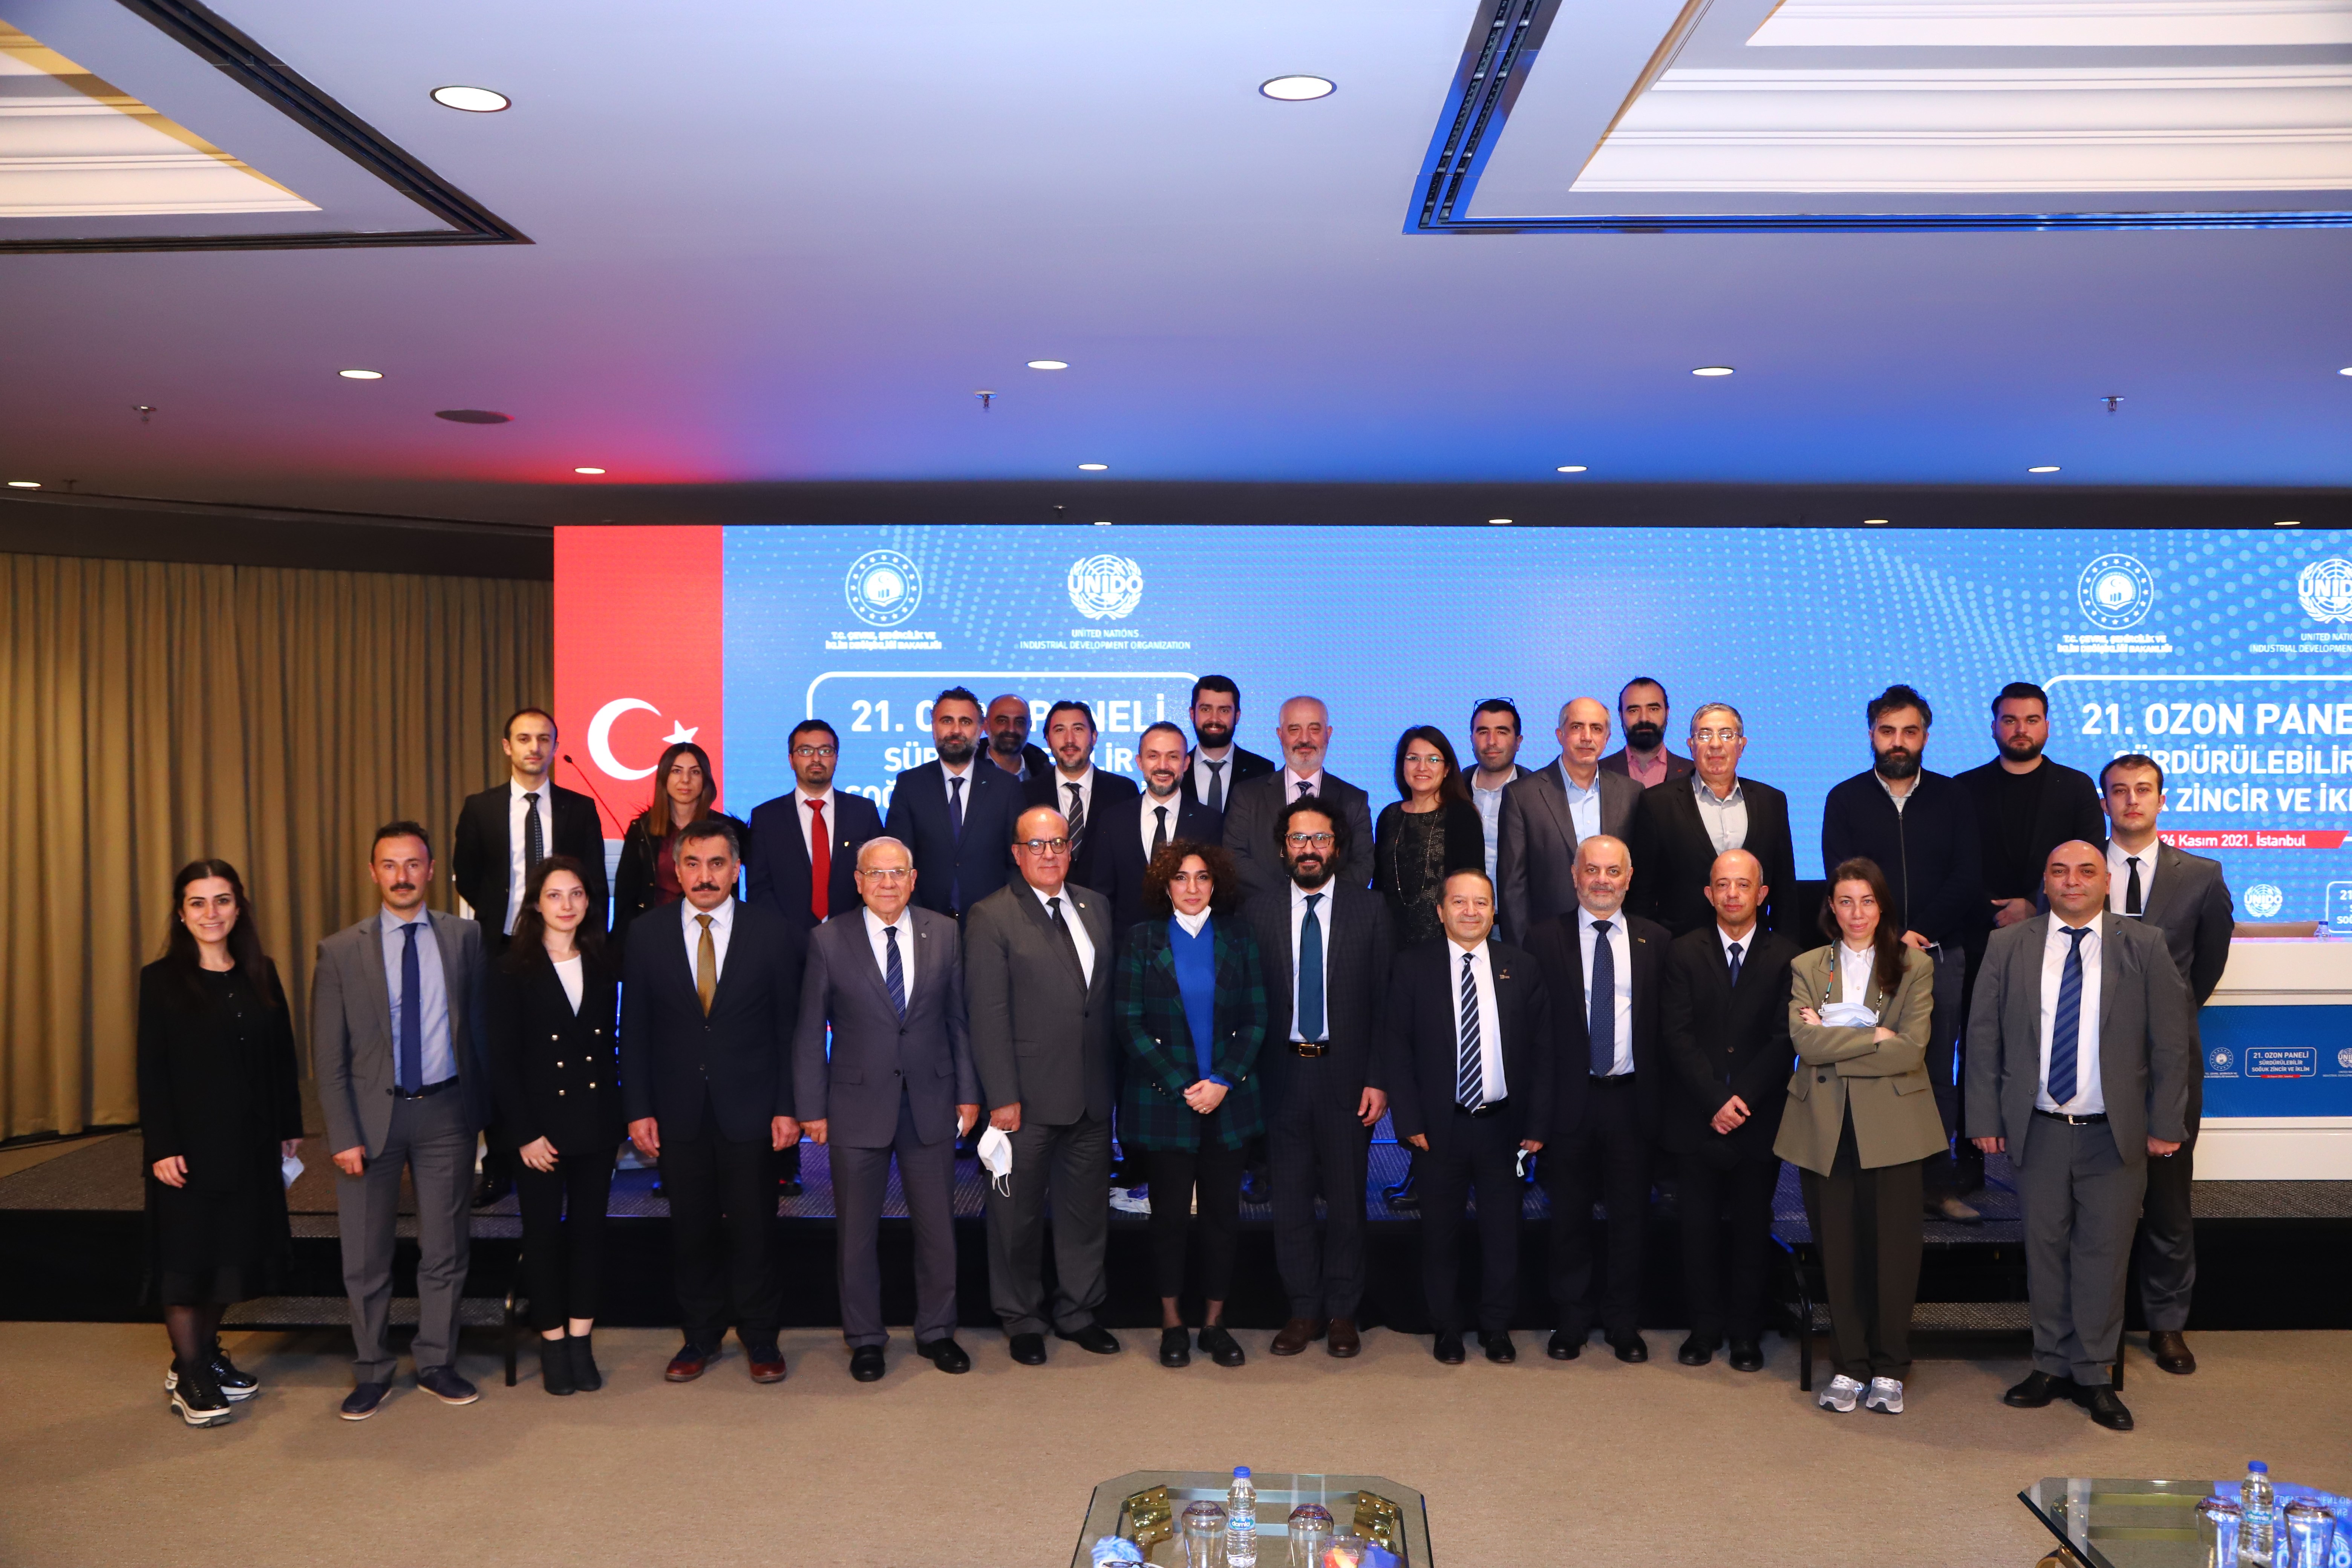 21st Ozone Panel was Held on 26 November in Istanbul